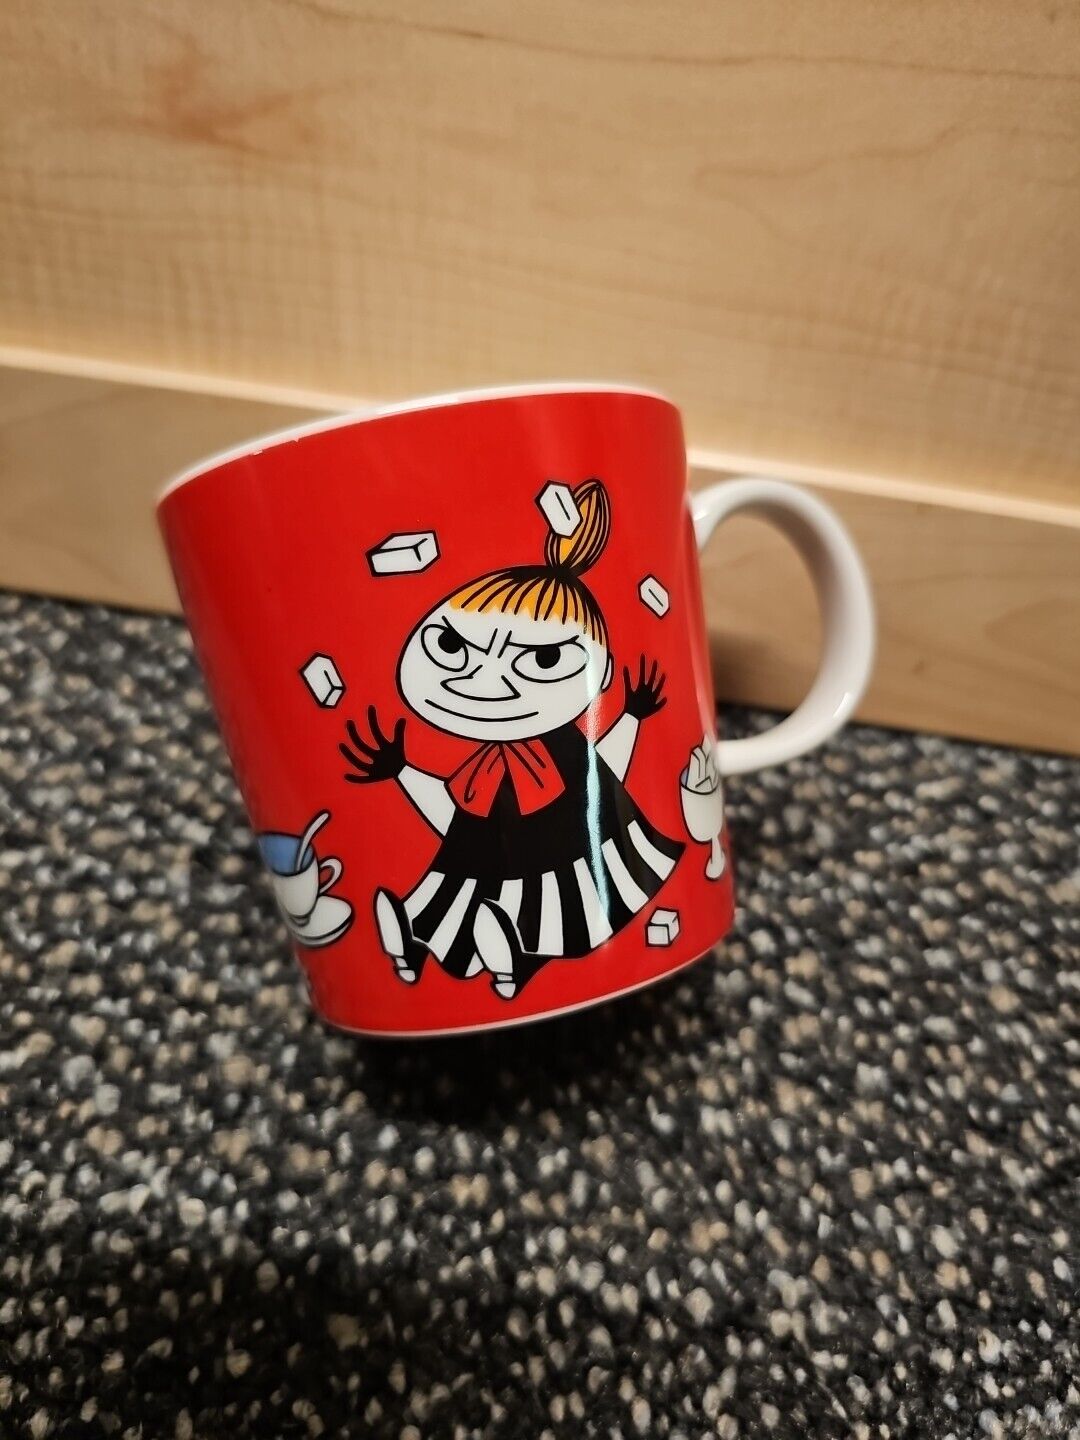 Arabia Little My Mug in Red Color Moomin Collection Finland 2015 Excellent cond